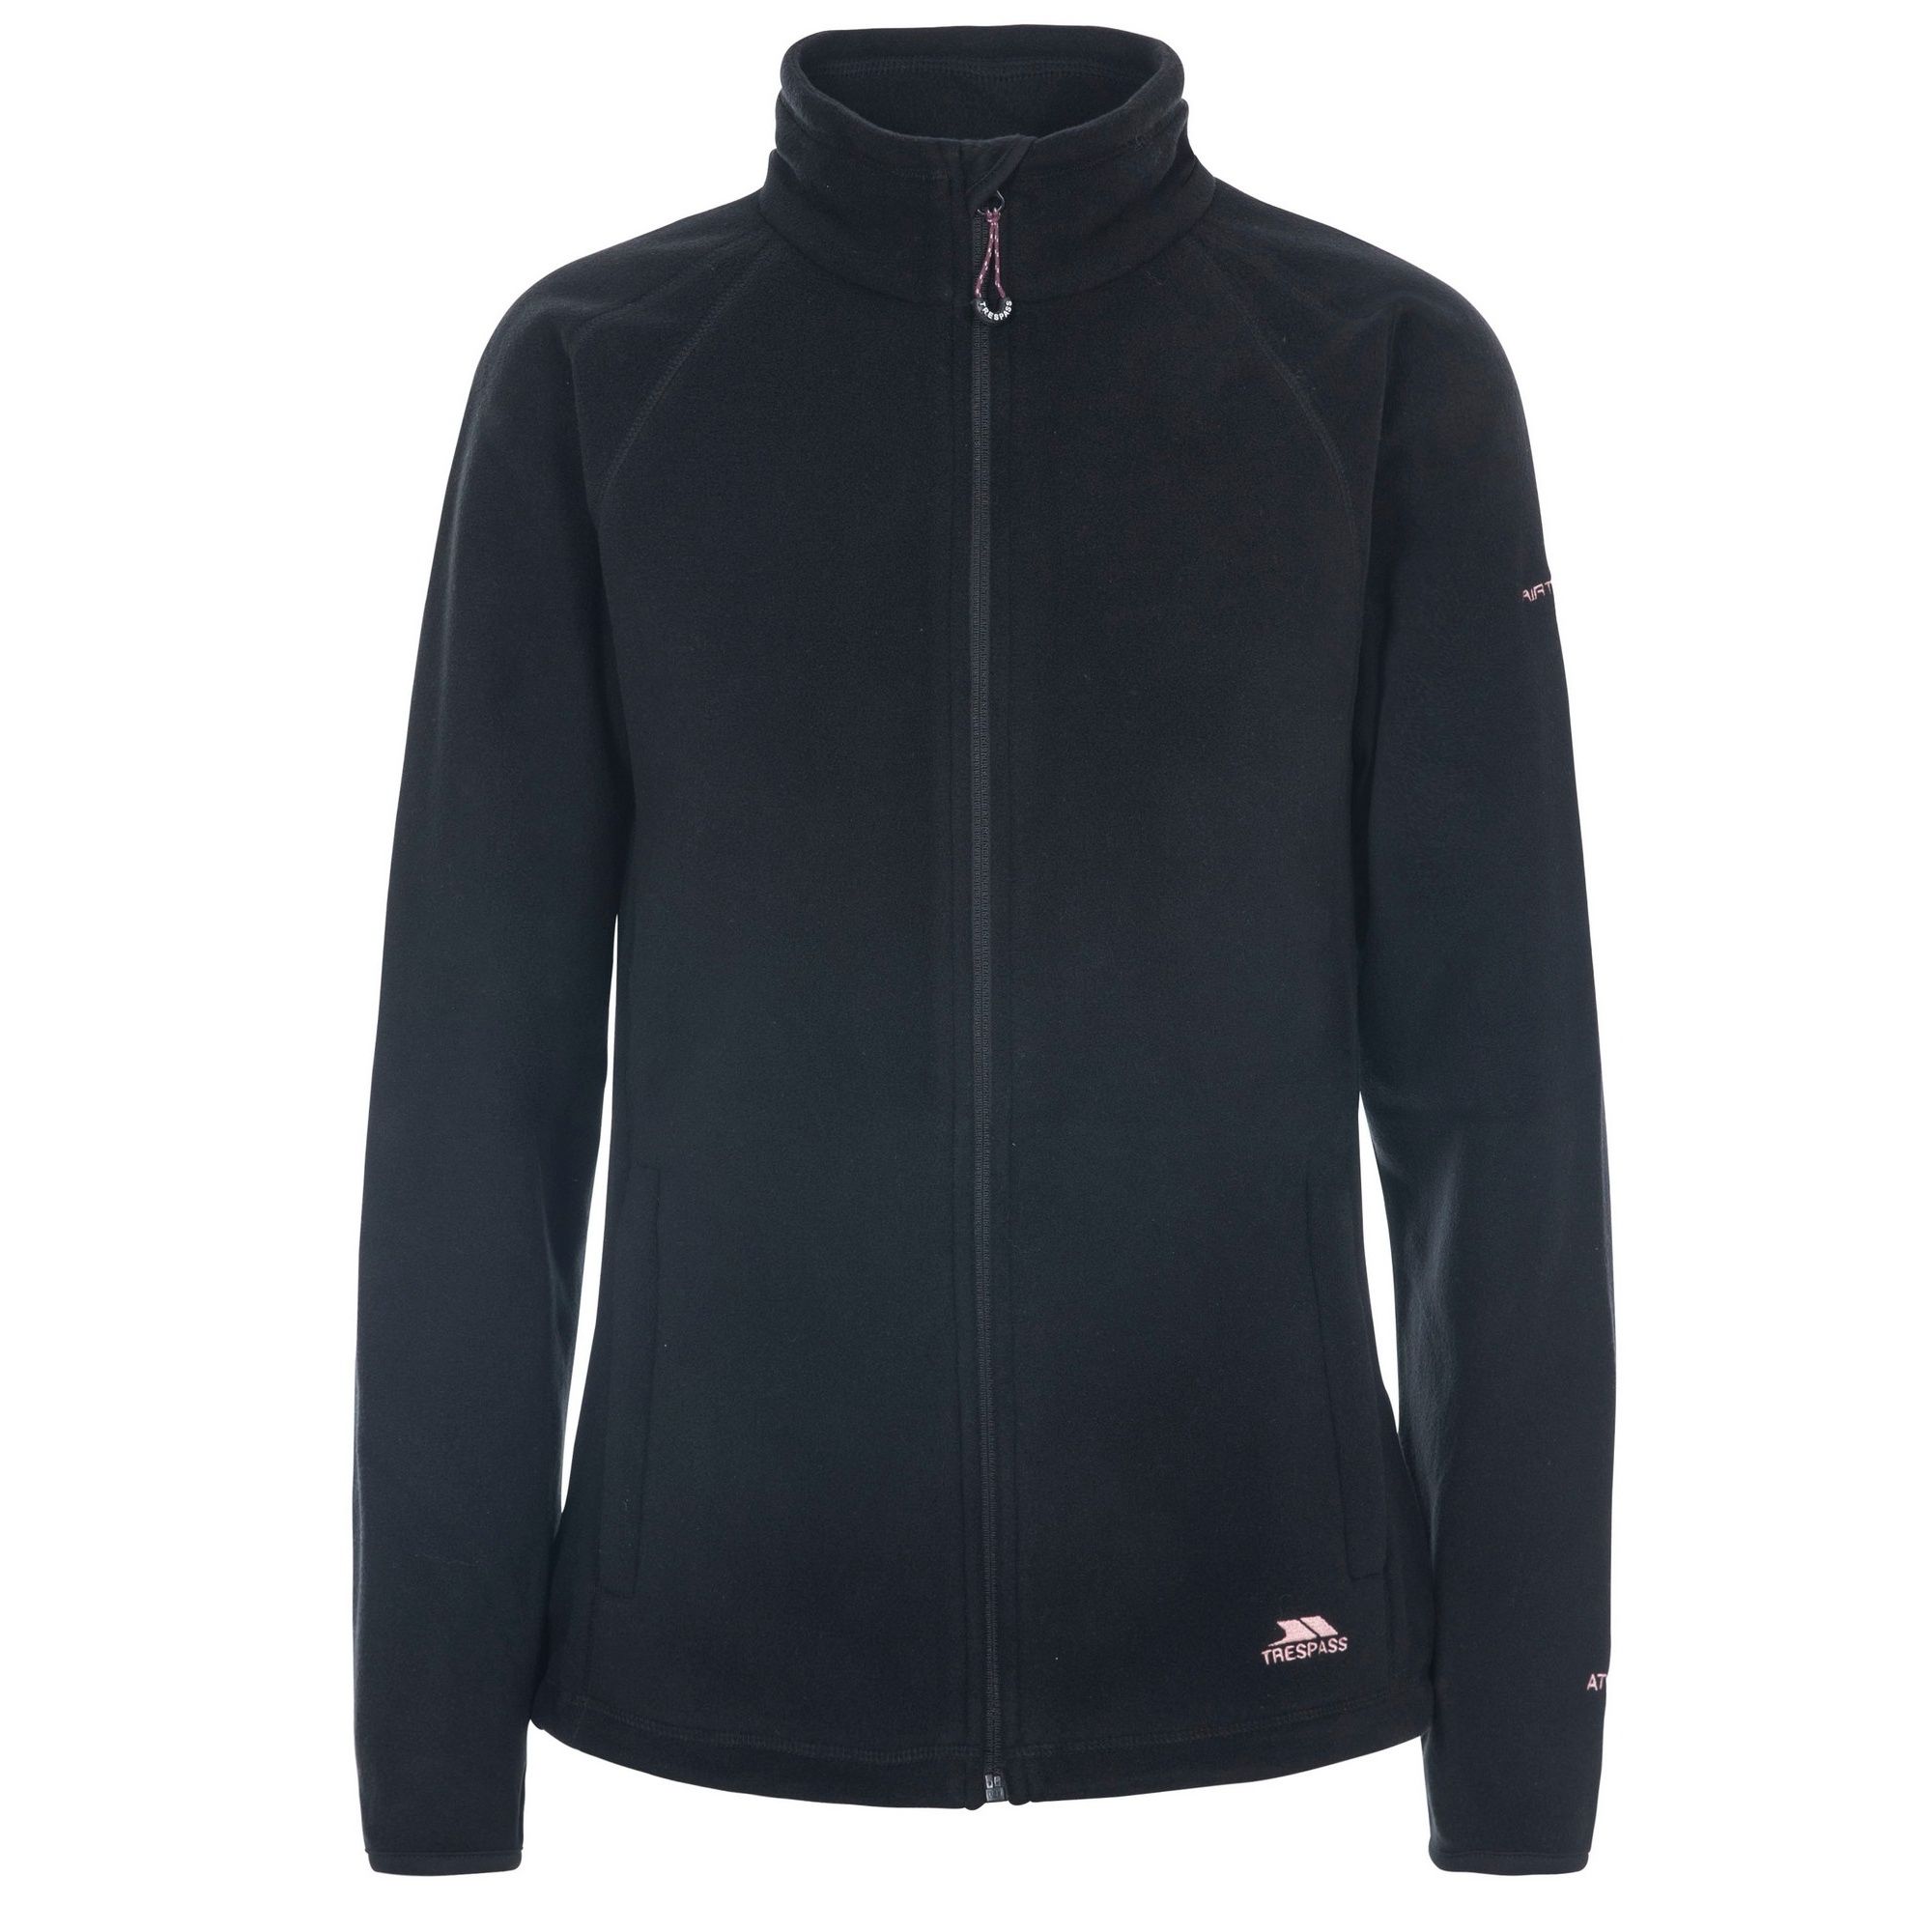 100% Polyester. Microfleece. Both sides brushed. Anti-pilling. Full front zip. 2 zip pockets. Binding at cuffs. Adjustable hem drawcord. Airtrap. 170gsm. Trespass Womens Chest Sizing (approx): XS/8 - 32in/81cm, S/10 - 34in/86cm, M/12 - 36in/91.4cm, L/14 - 38in/96.5cm, XL/16 - 40in/101.5cm, XXL/18 - 42in/106.5cm.